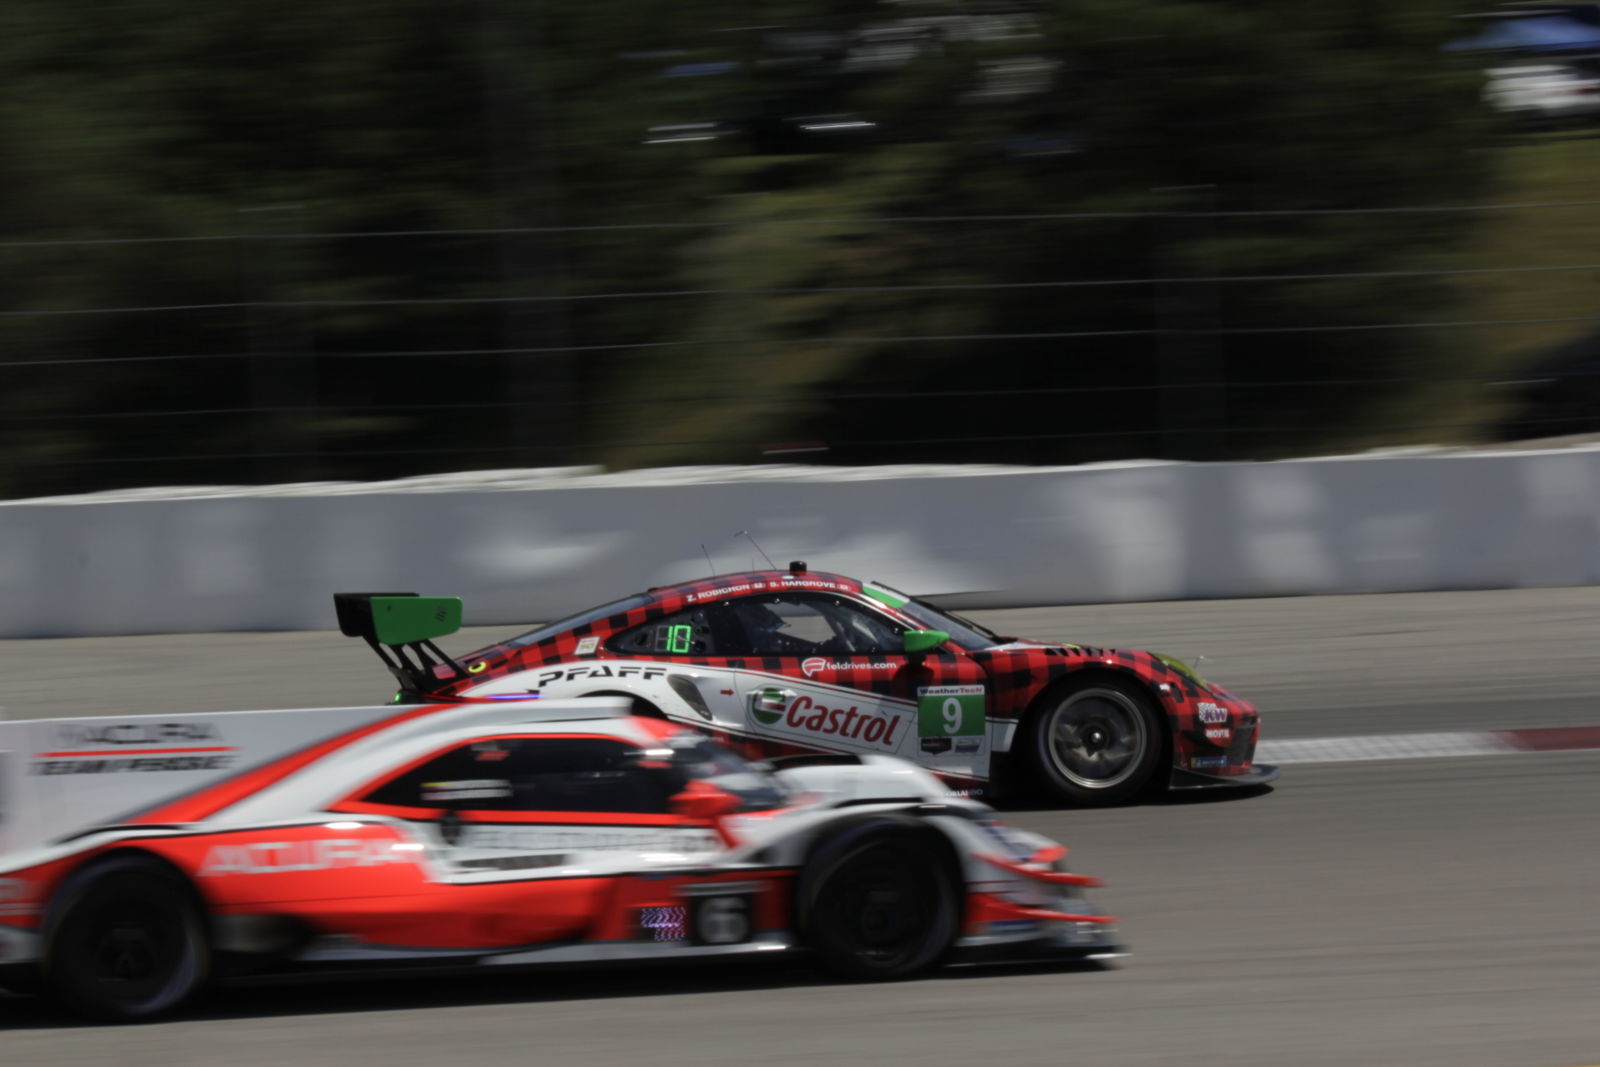 This was going to just be a shot of the Pfaff porche, then Mr. Acura DPi came into it. Made it a neat shot.